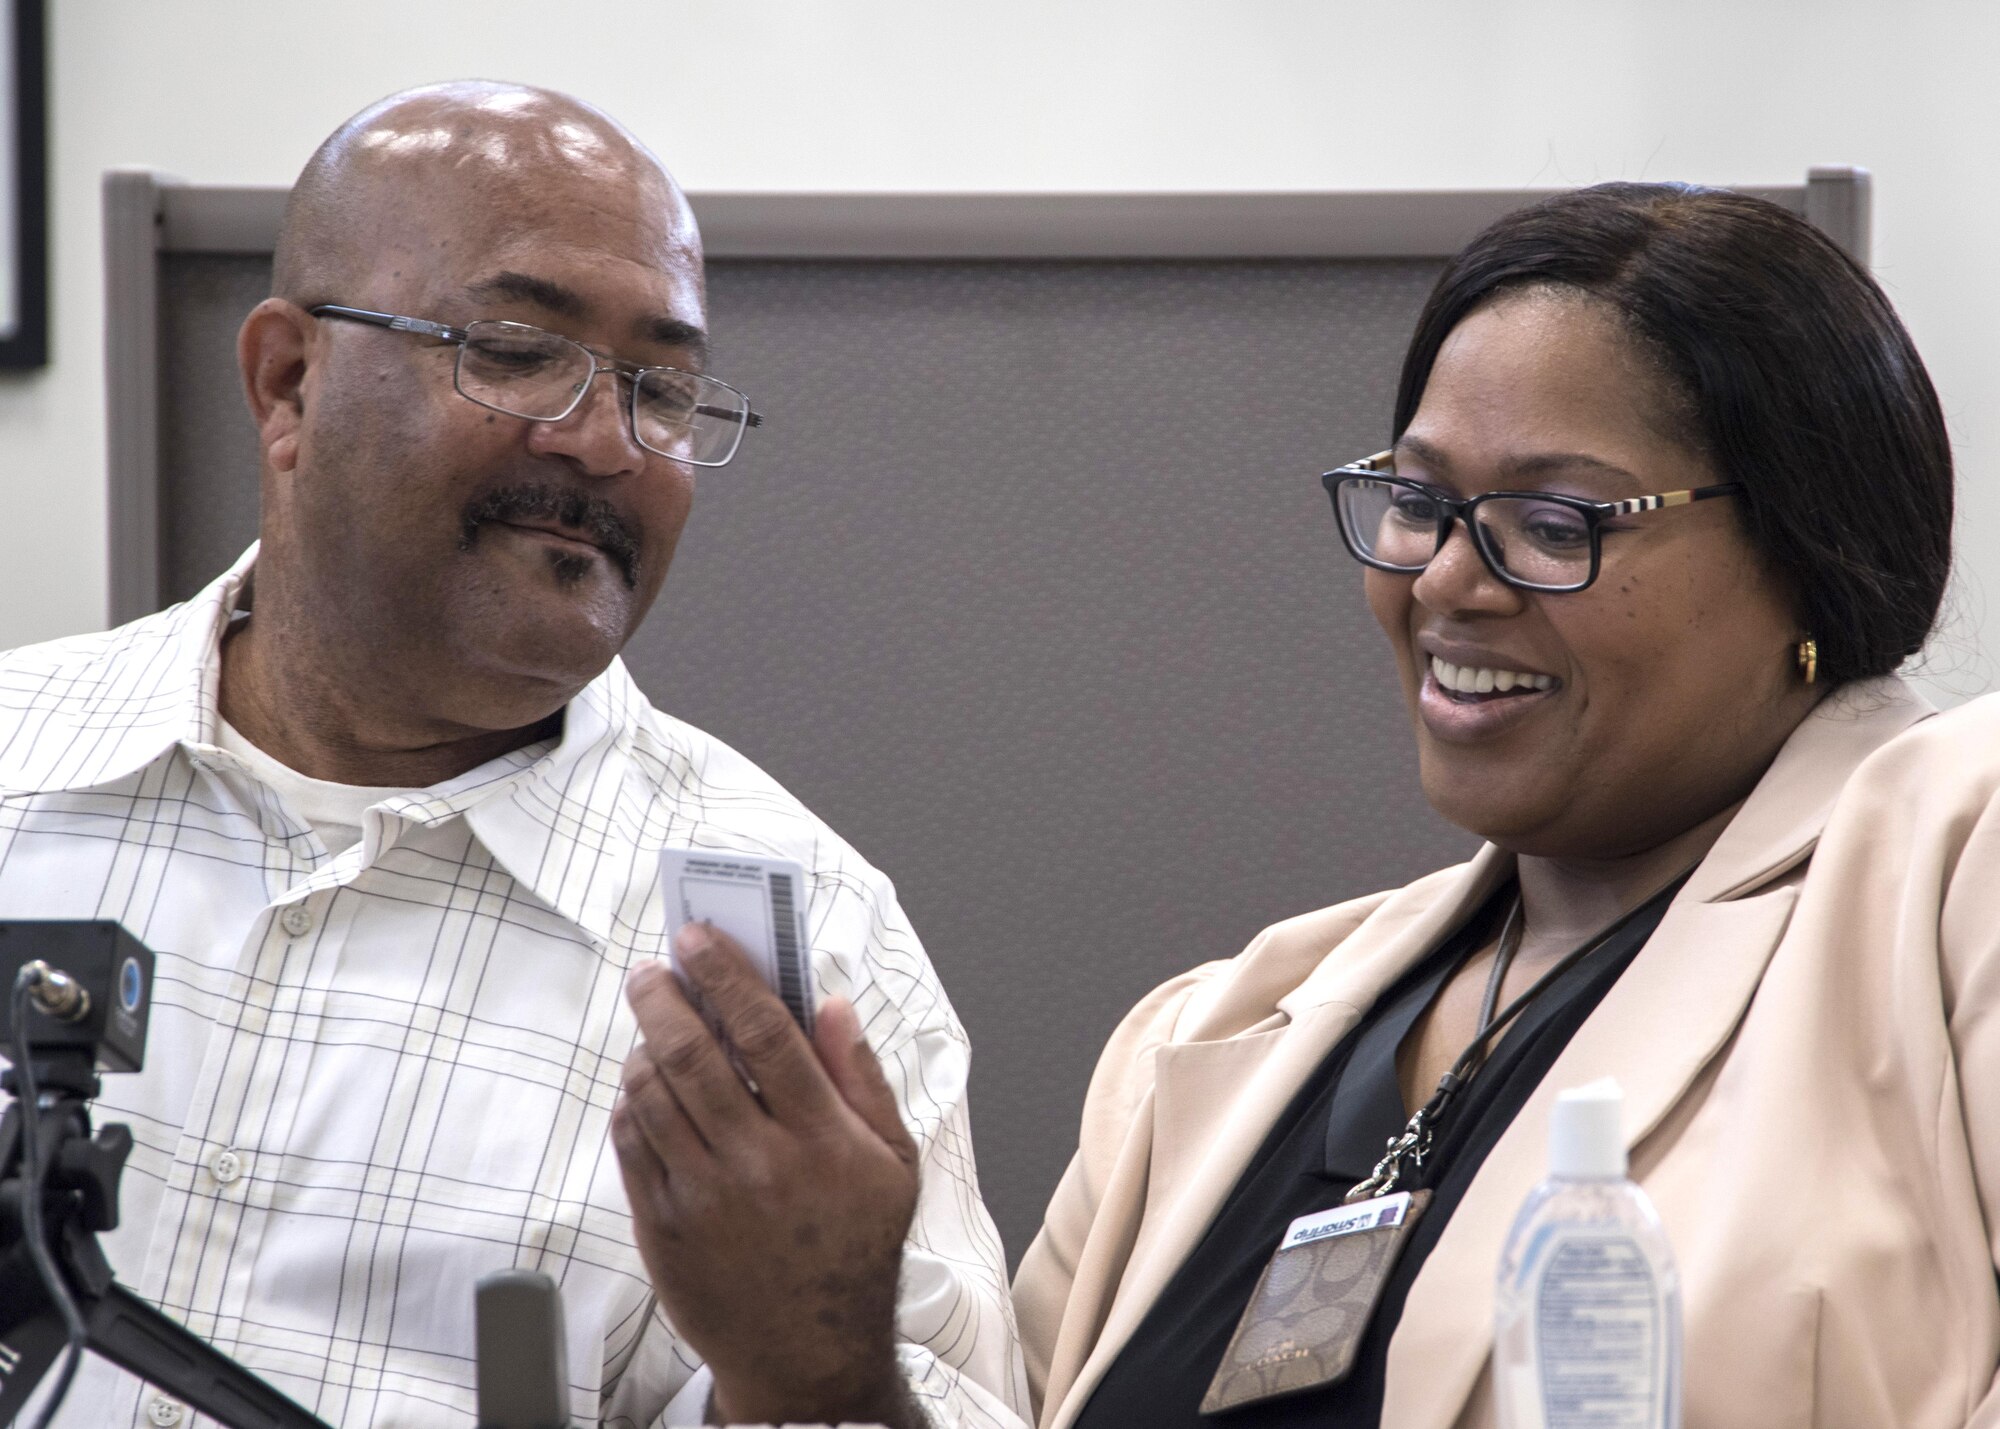 Michael L. Chavis, left, Gold Star parent, shows his new Gold Star Base Access ID card to Carla Diamond, right, U.S. Air Force Headquarters community readiness consultant, at Joint Base Andrews, Md., May 1, 2017. These cards are part of an Air Force initiative allowing Gold Star family members, immediate relatives of deceased Airmen, unescorted access to Air Force installations to visit buried loved ones, attend base events, and stop by Airmen and Family Readiness Centers for support. The Air Force initiative refers to parents, grandparents, siblings and adult children of Airmen killed in action, international terrorist attack against the U.S. or military operations while serving outside the U.S. as part of a peacekeeping force. (U.S. Air Force photo by Senior Airman Jordyn Fetter)